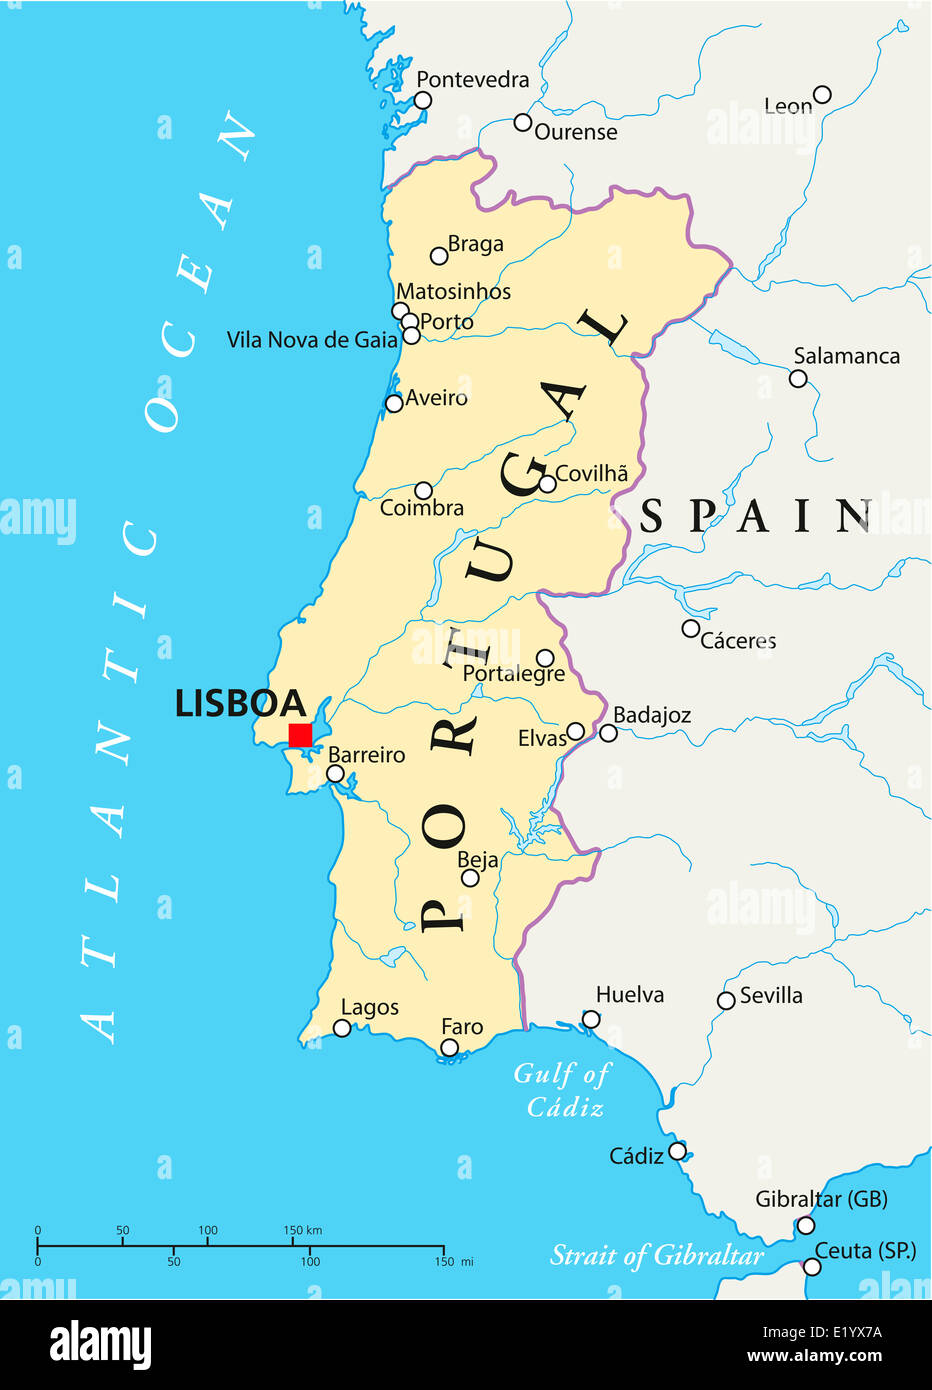 Portugal Political Map with capital Lisbon, national borders, most important cities, rivers and lakes. English labeling. Stock Photo